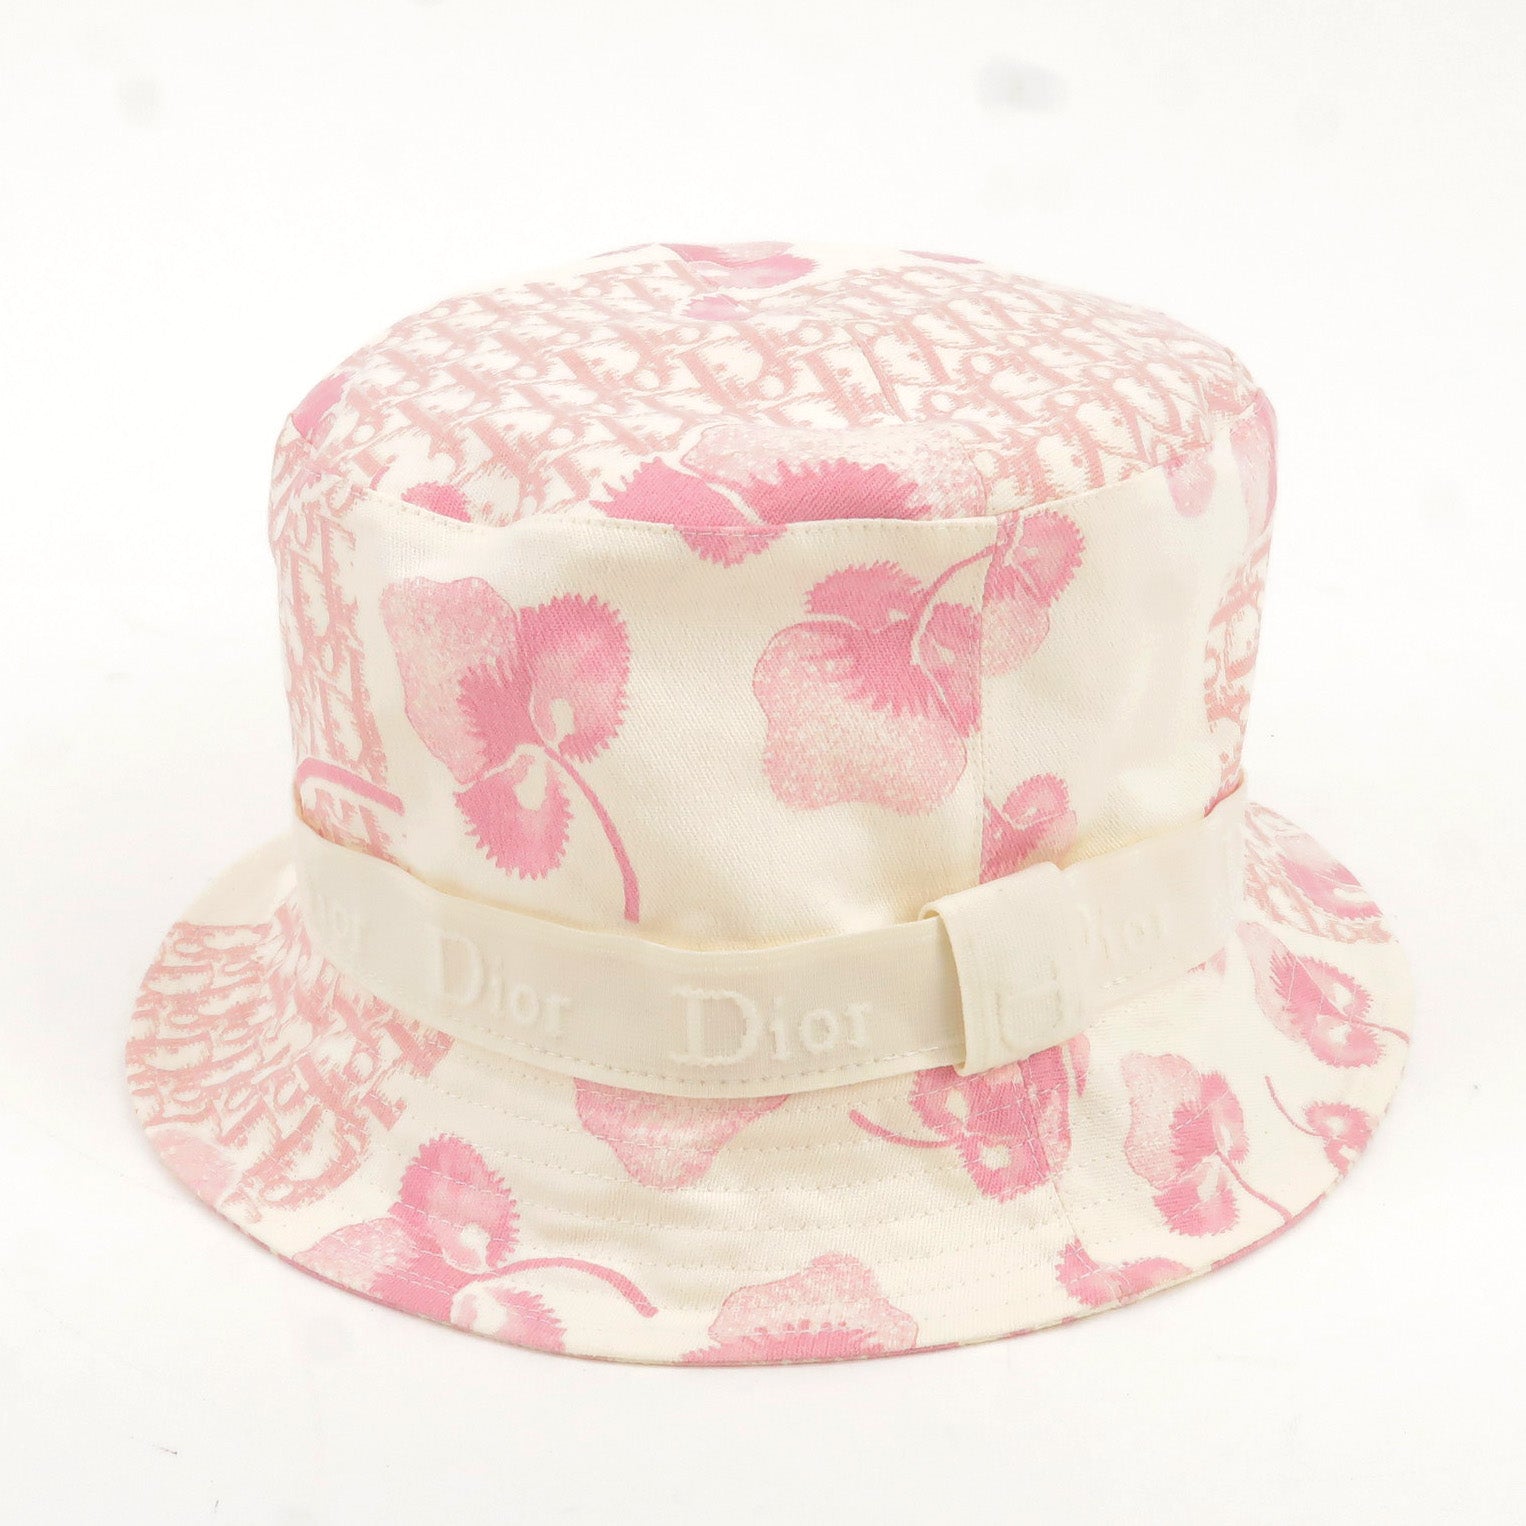 Cotton - Bucket - Size - Hat - Christian - Pink - care lighters - Cappello  con visiera HURLEY M Iron Corp Hat HIHM0088 65 - White – hat m shoe - 57 -  Trotter - Dior